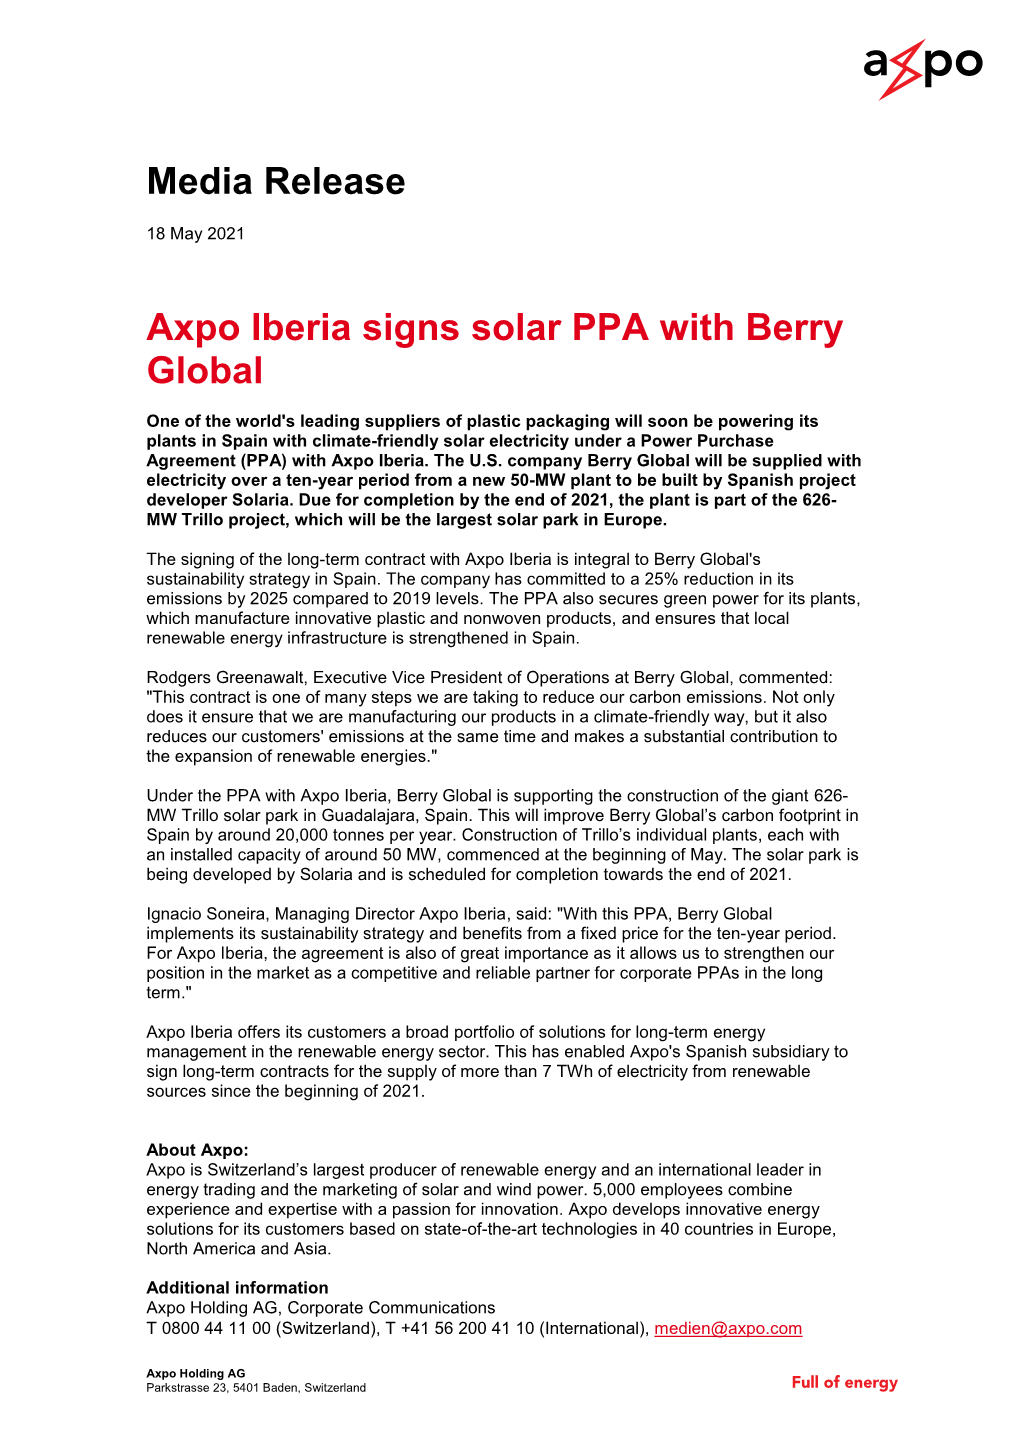 Media Release Axpo Iberia Signs Solar PPA with Berry Global